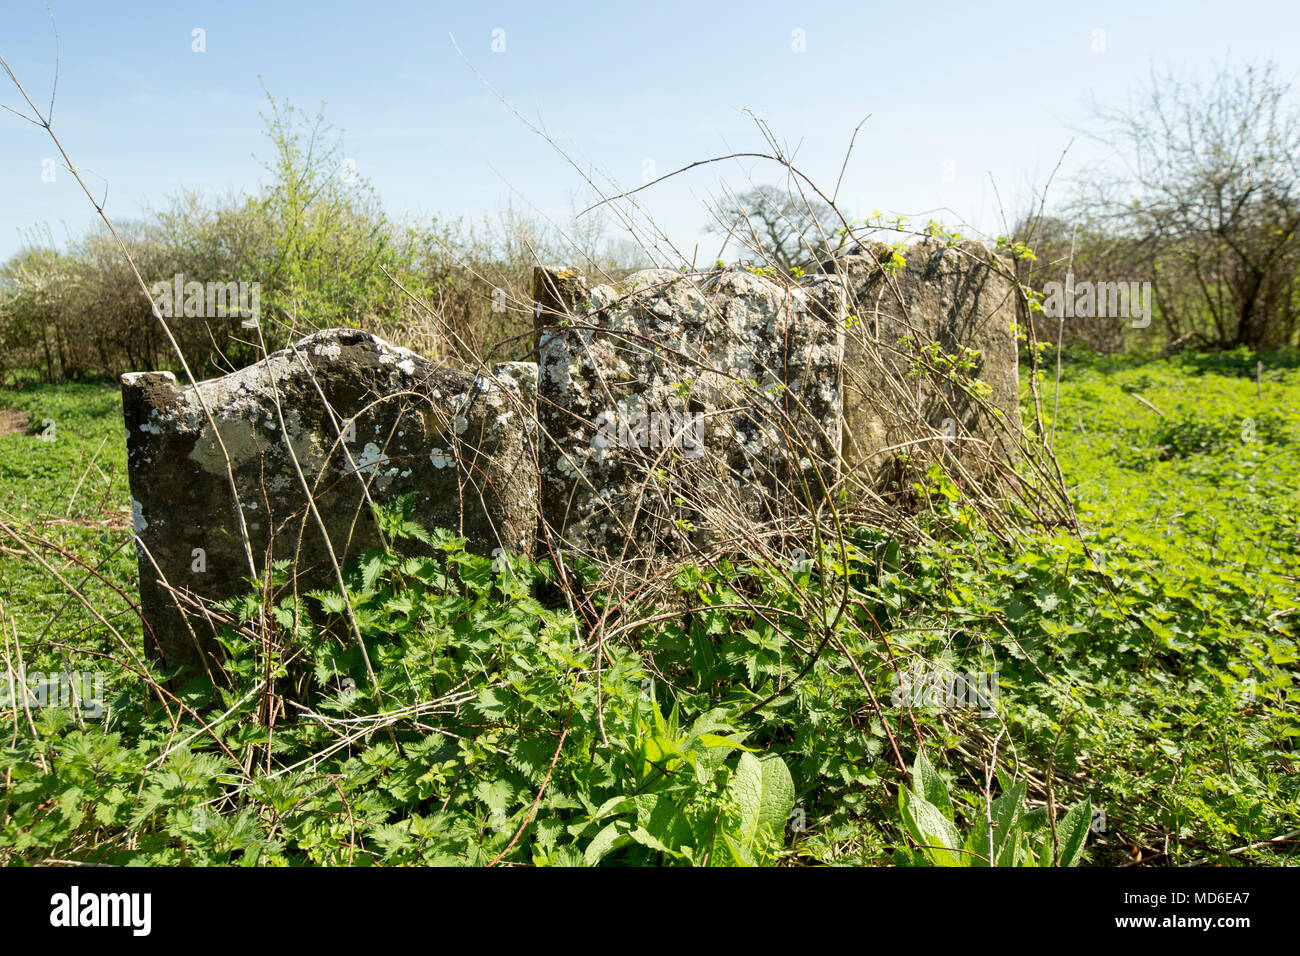 Gravestones in the remains of St Mary’s Church and graveyard East Stoke Dorset England UK. A sign at the site states that most of the church dates bac Stock Photo